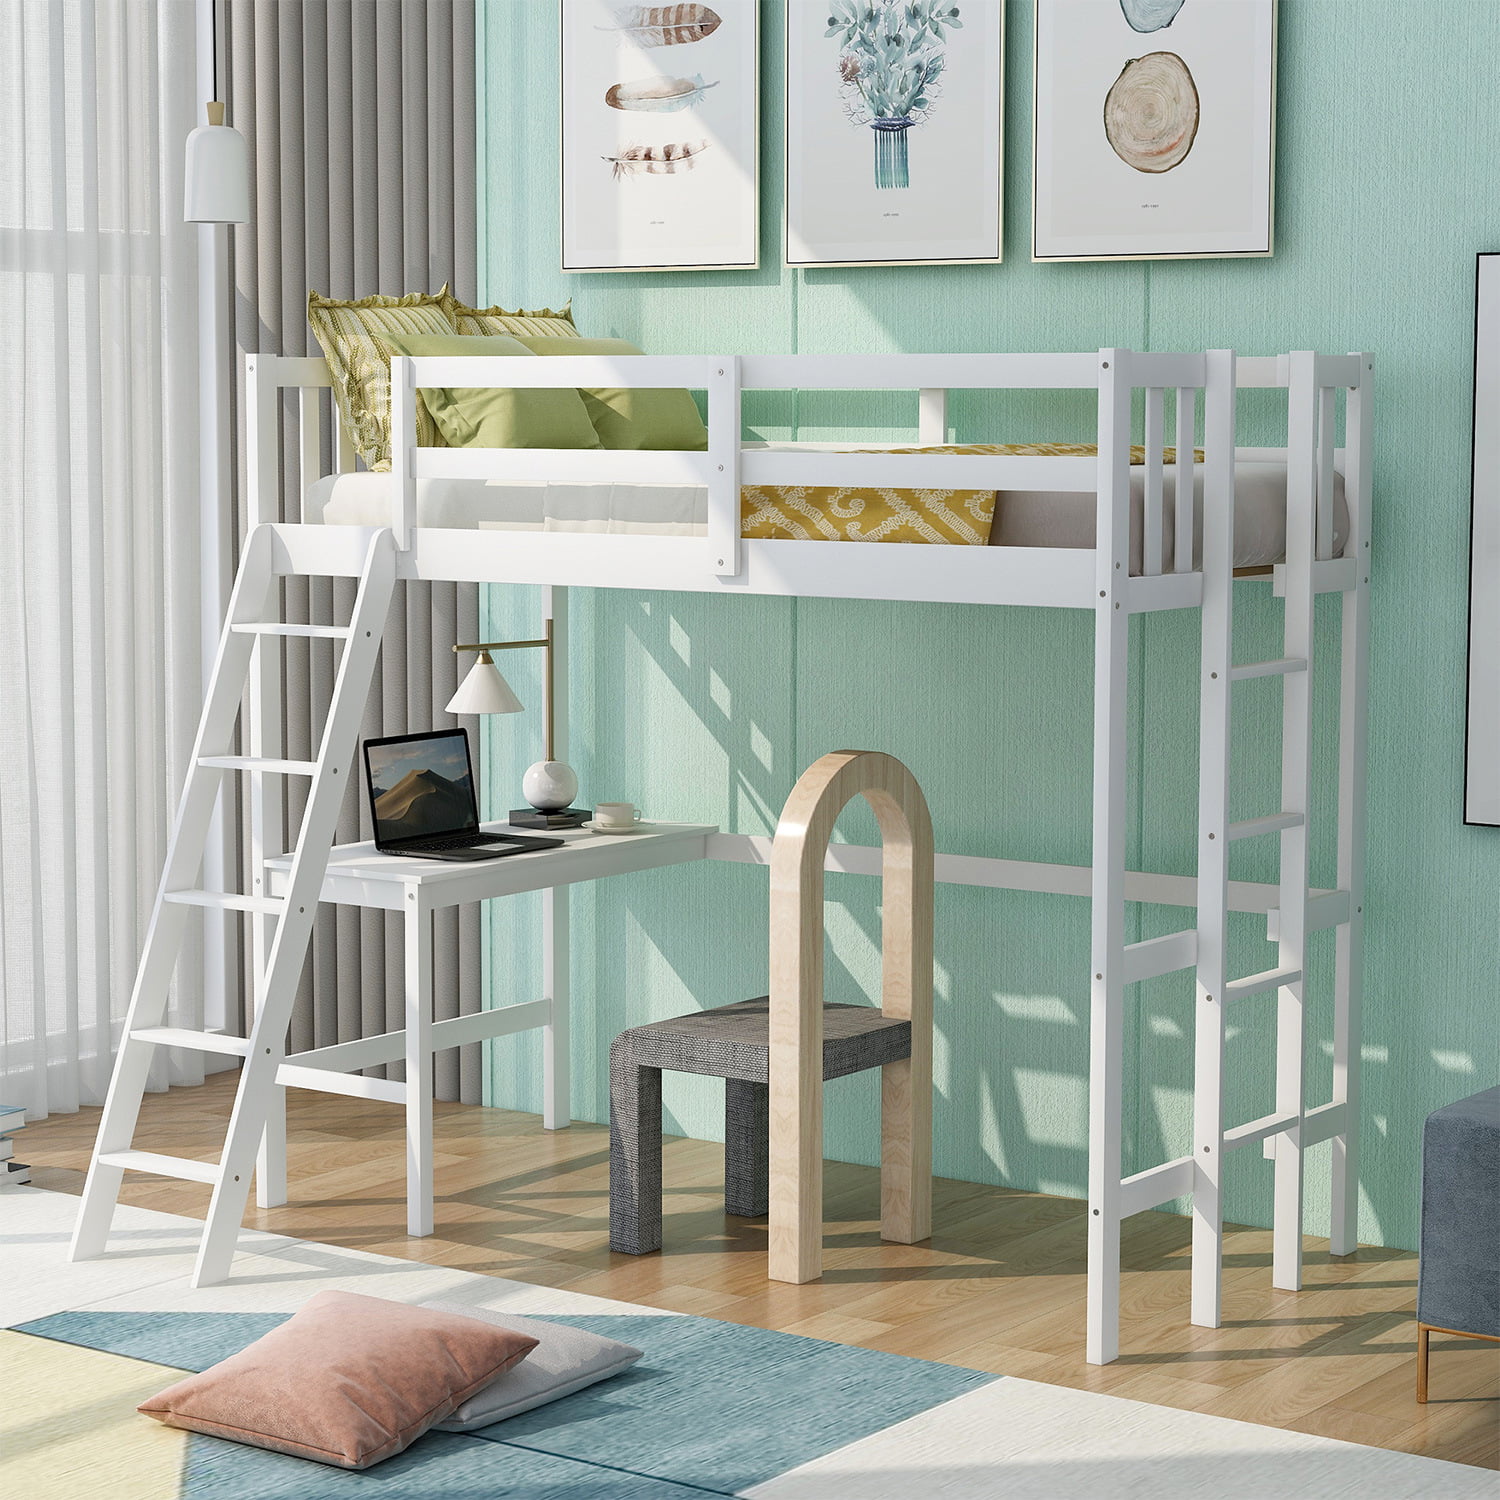 Loft Bed With Desk And Two Ladders, Fire Station Bunk Bed Furniture Row